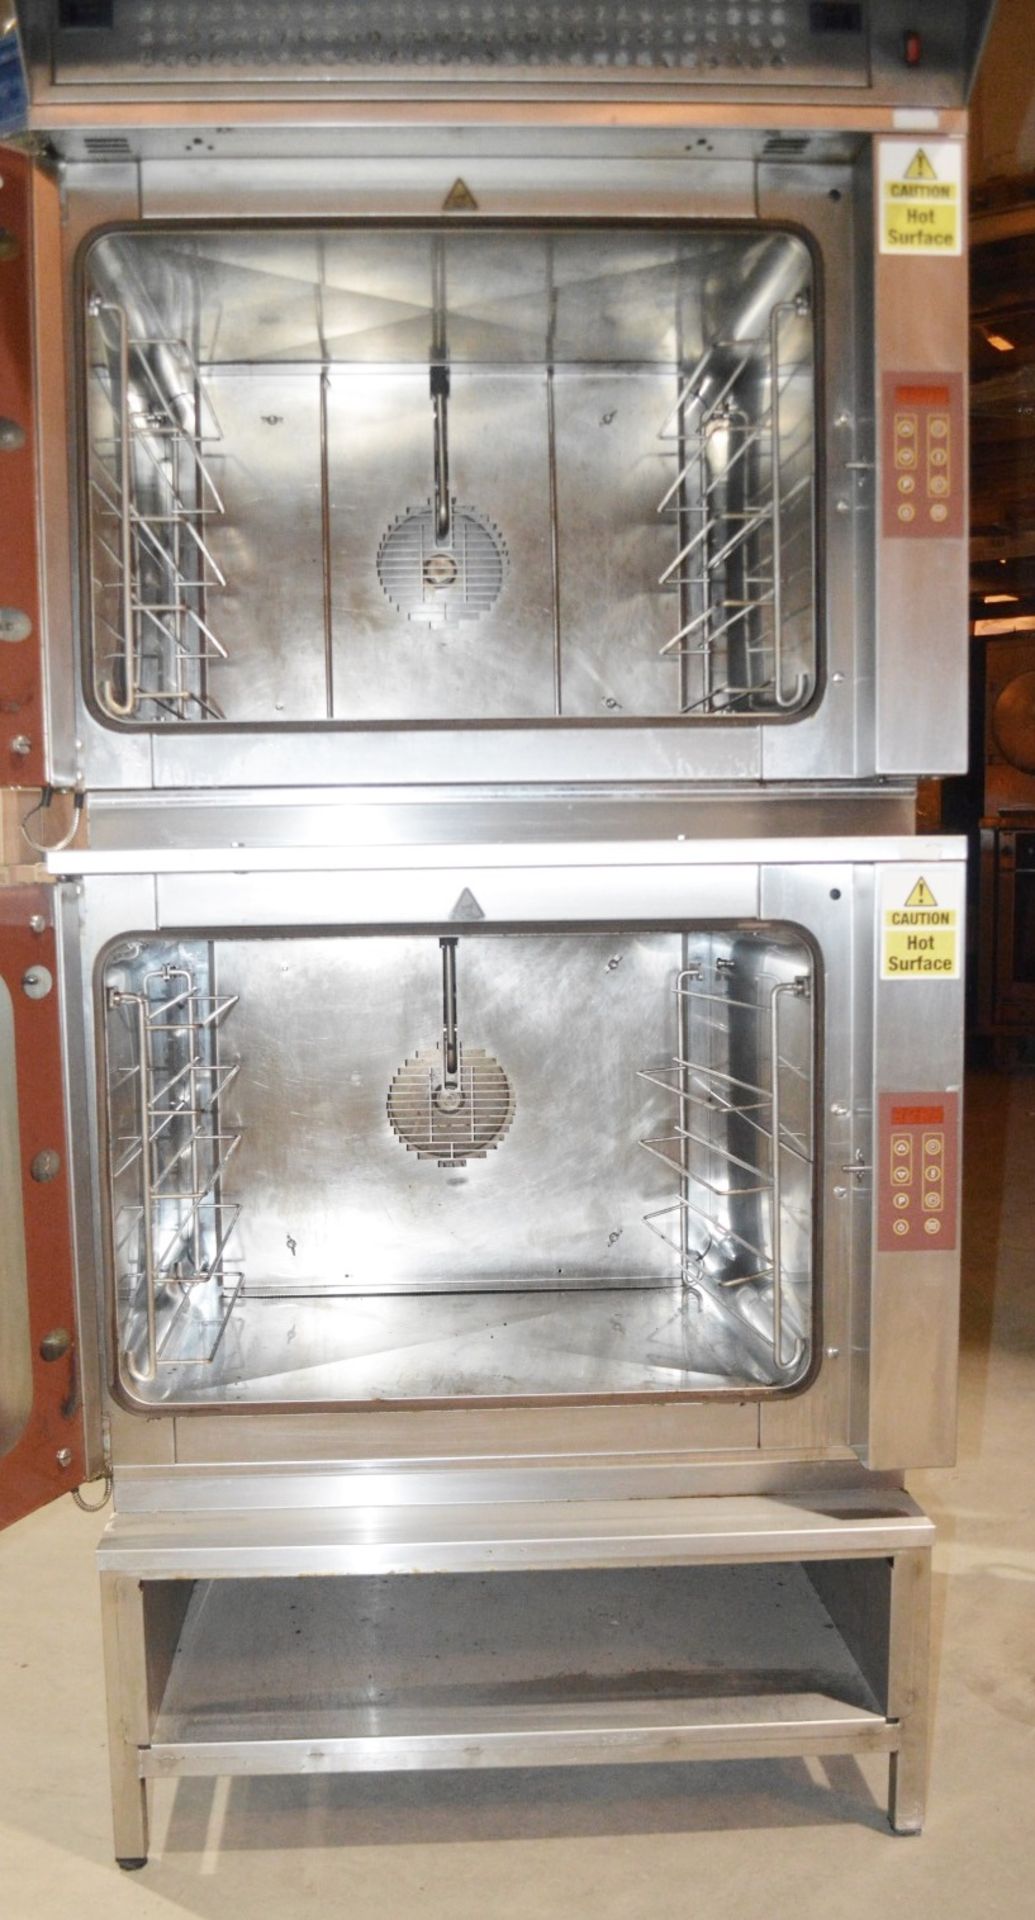 1 x FRI-JADO Stainless Steel Commercial Double Oven And Stand - Dimensions: H180 x W84 x D83cm - - Image 4 of 12